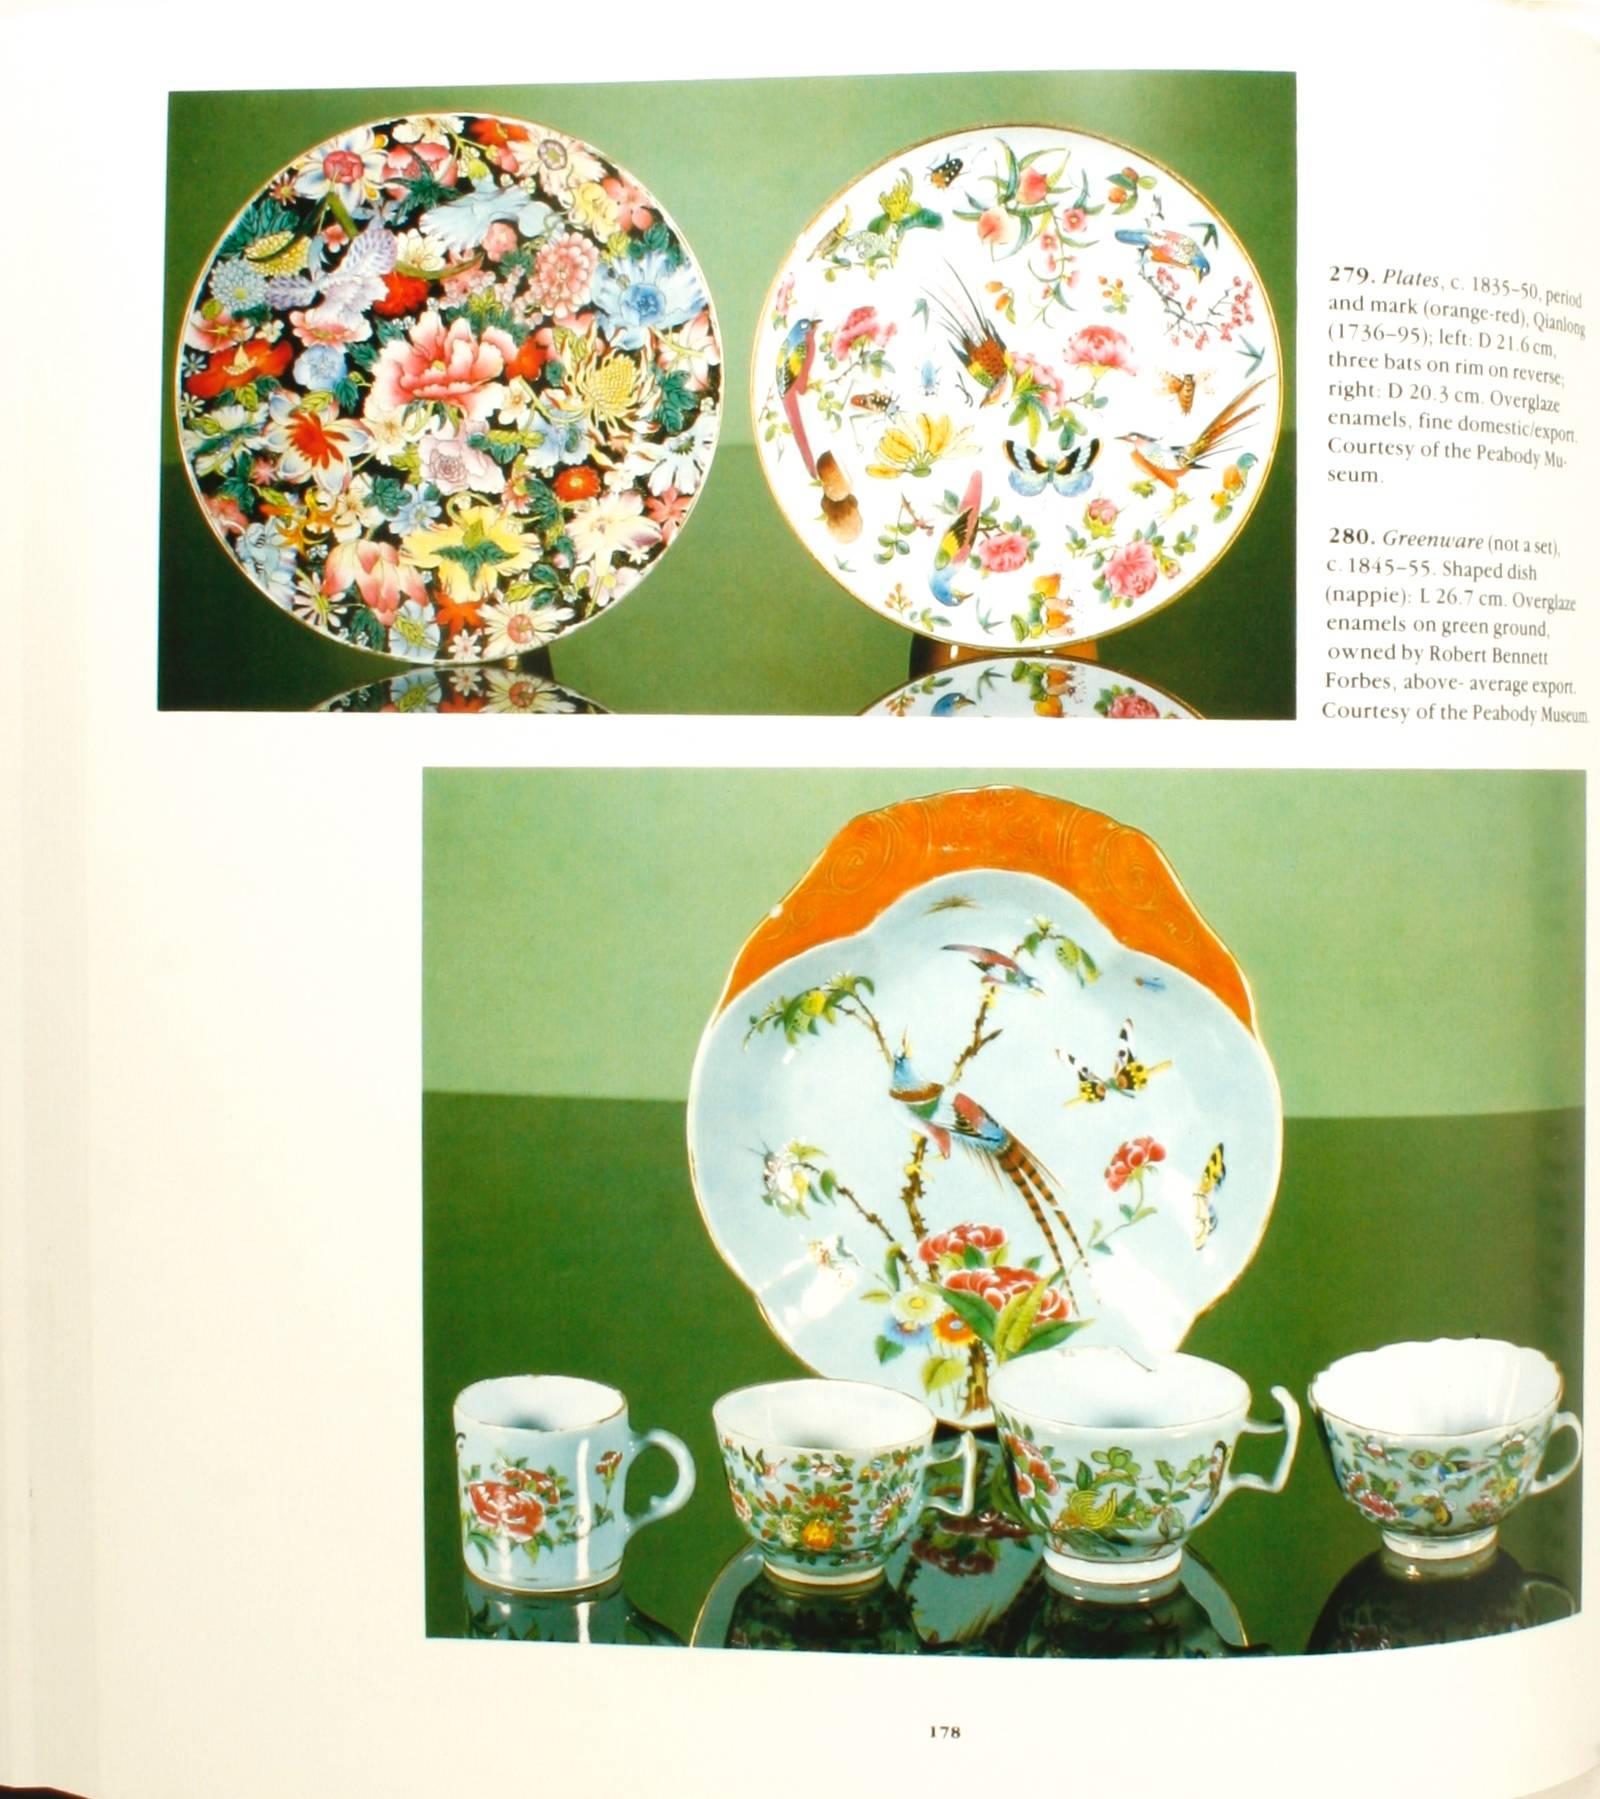 Late 20th Century Chinese Export Porcelain in North America by Jean McClure Mudge, 1st Ed For Sale